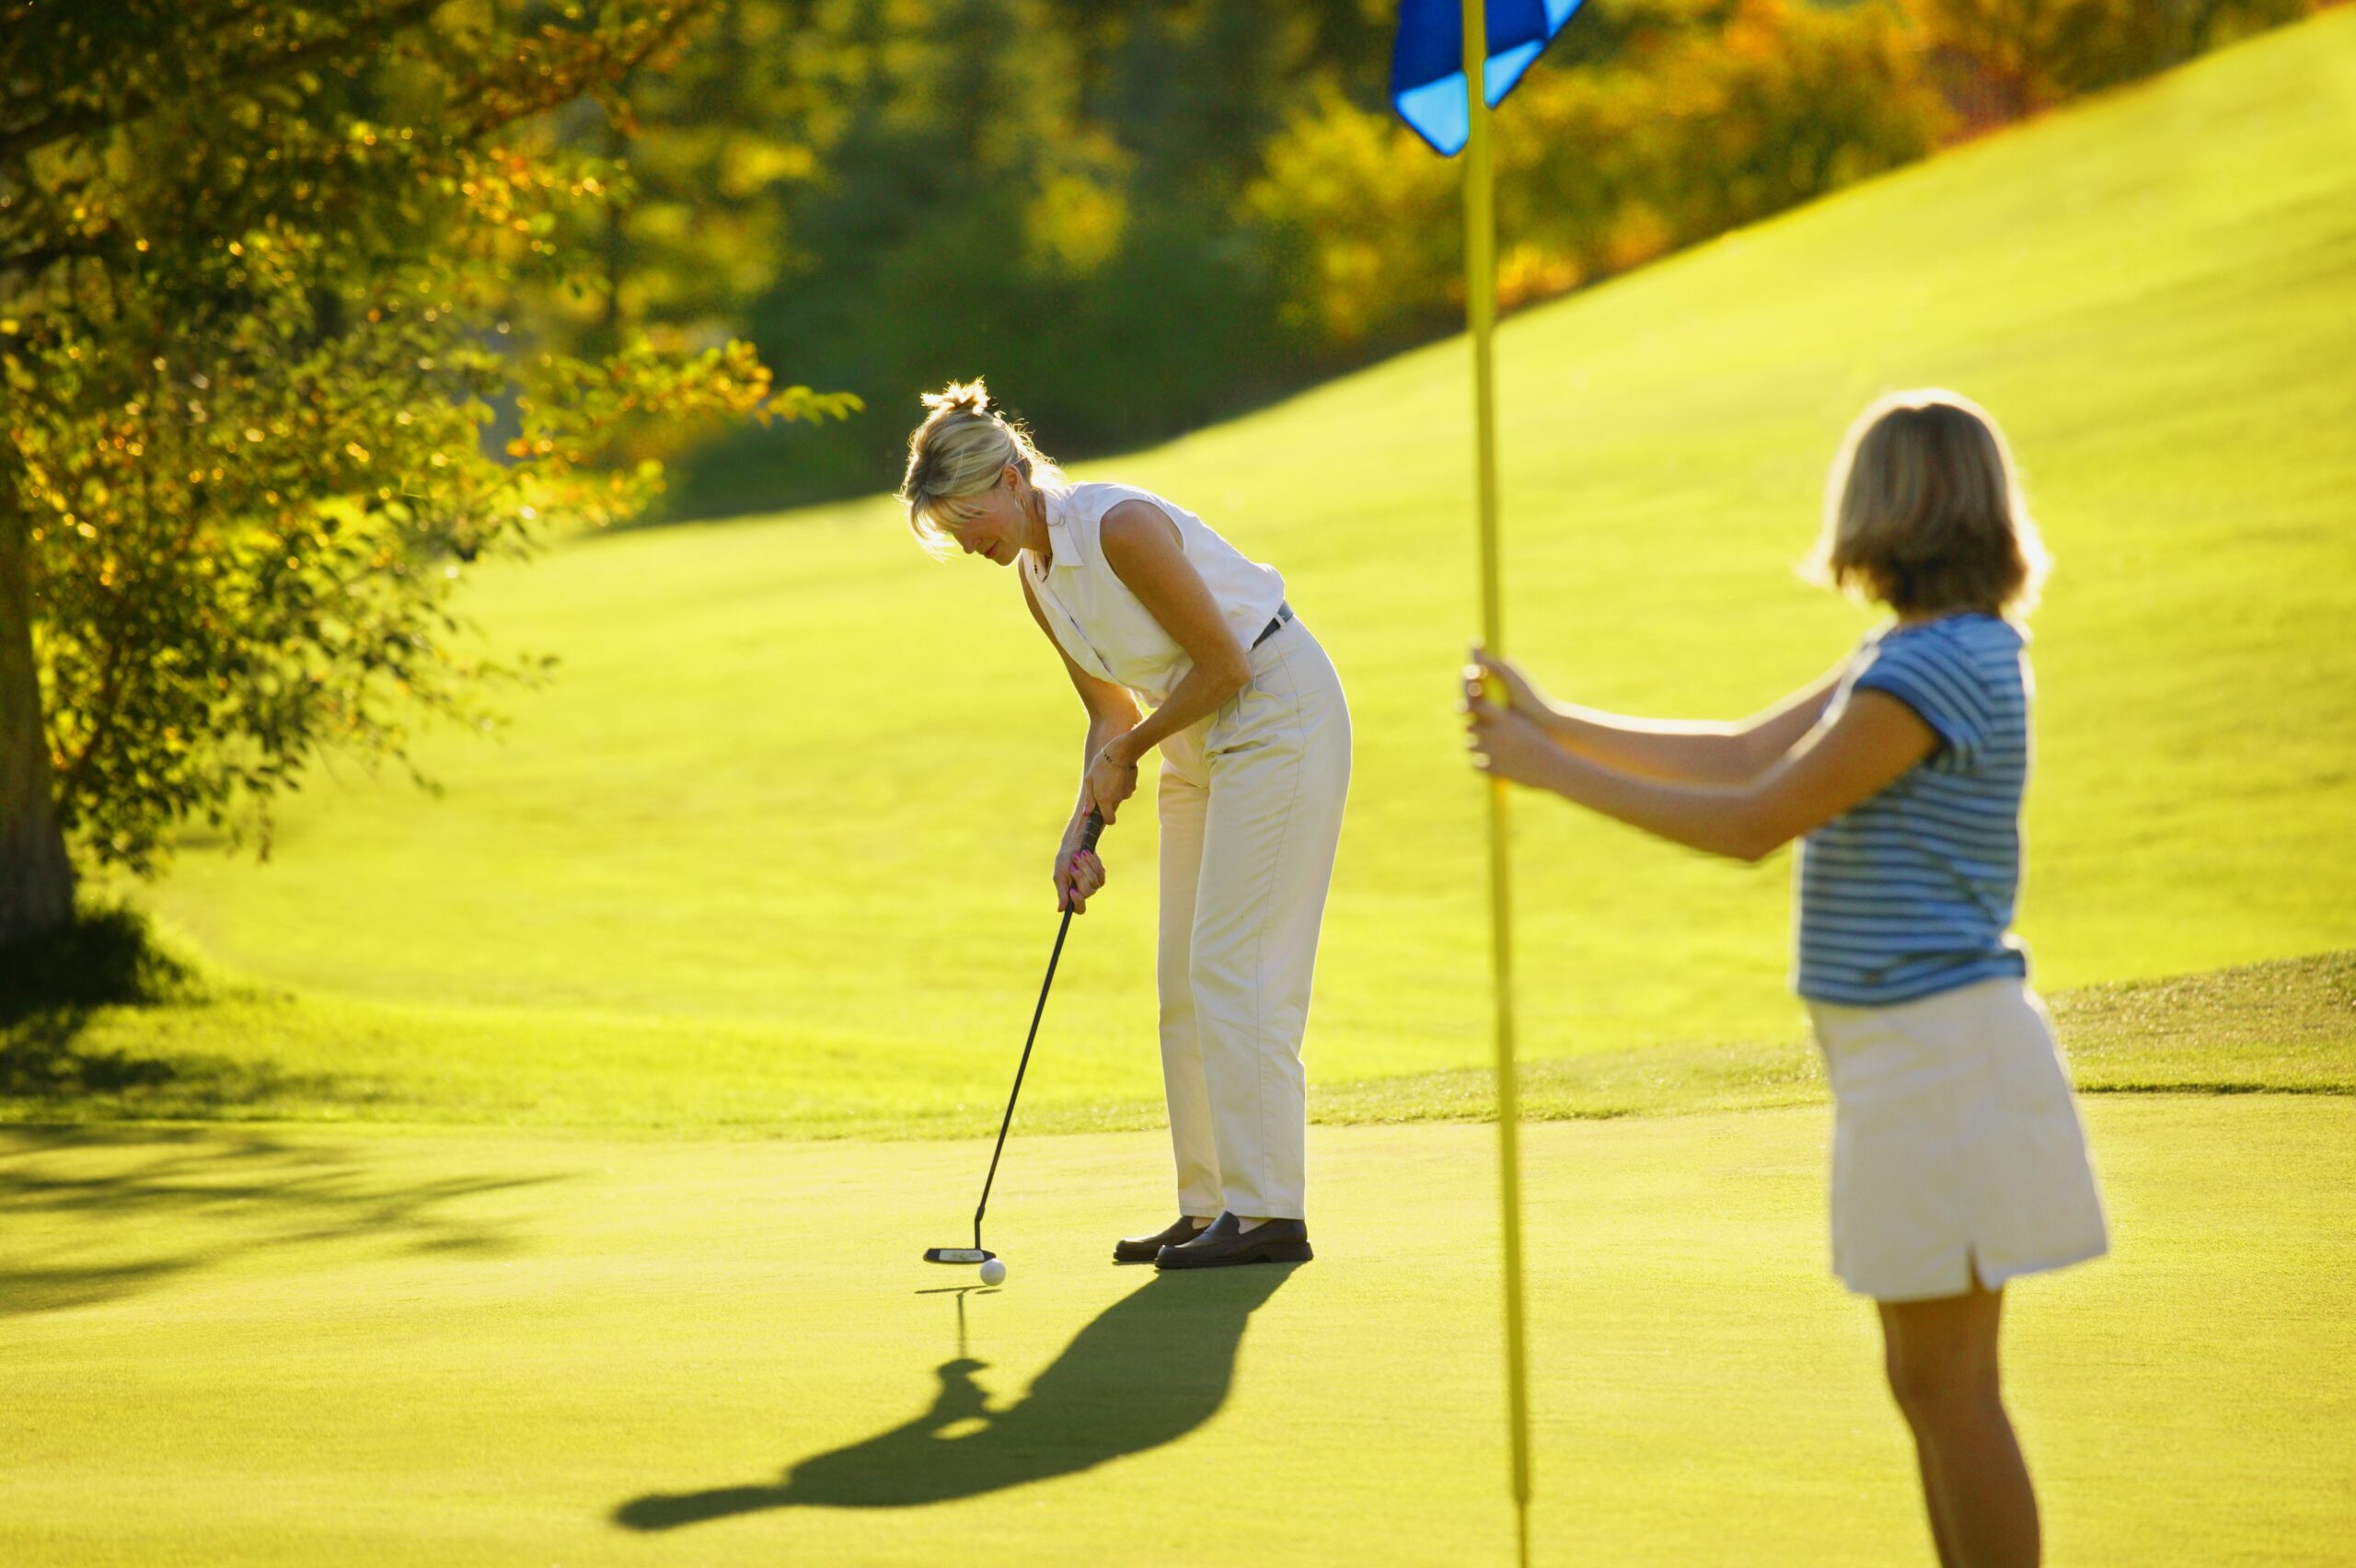 Two women out golfing on the green. One woman is putting, while the other is lifting the flag out of the pin.